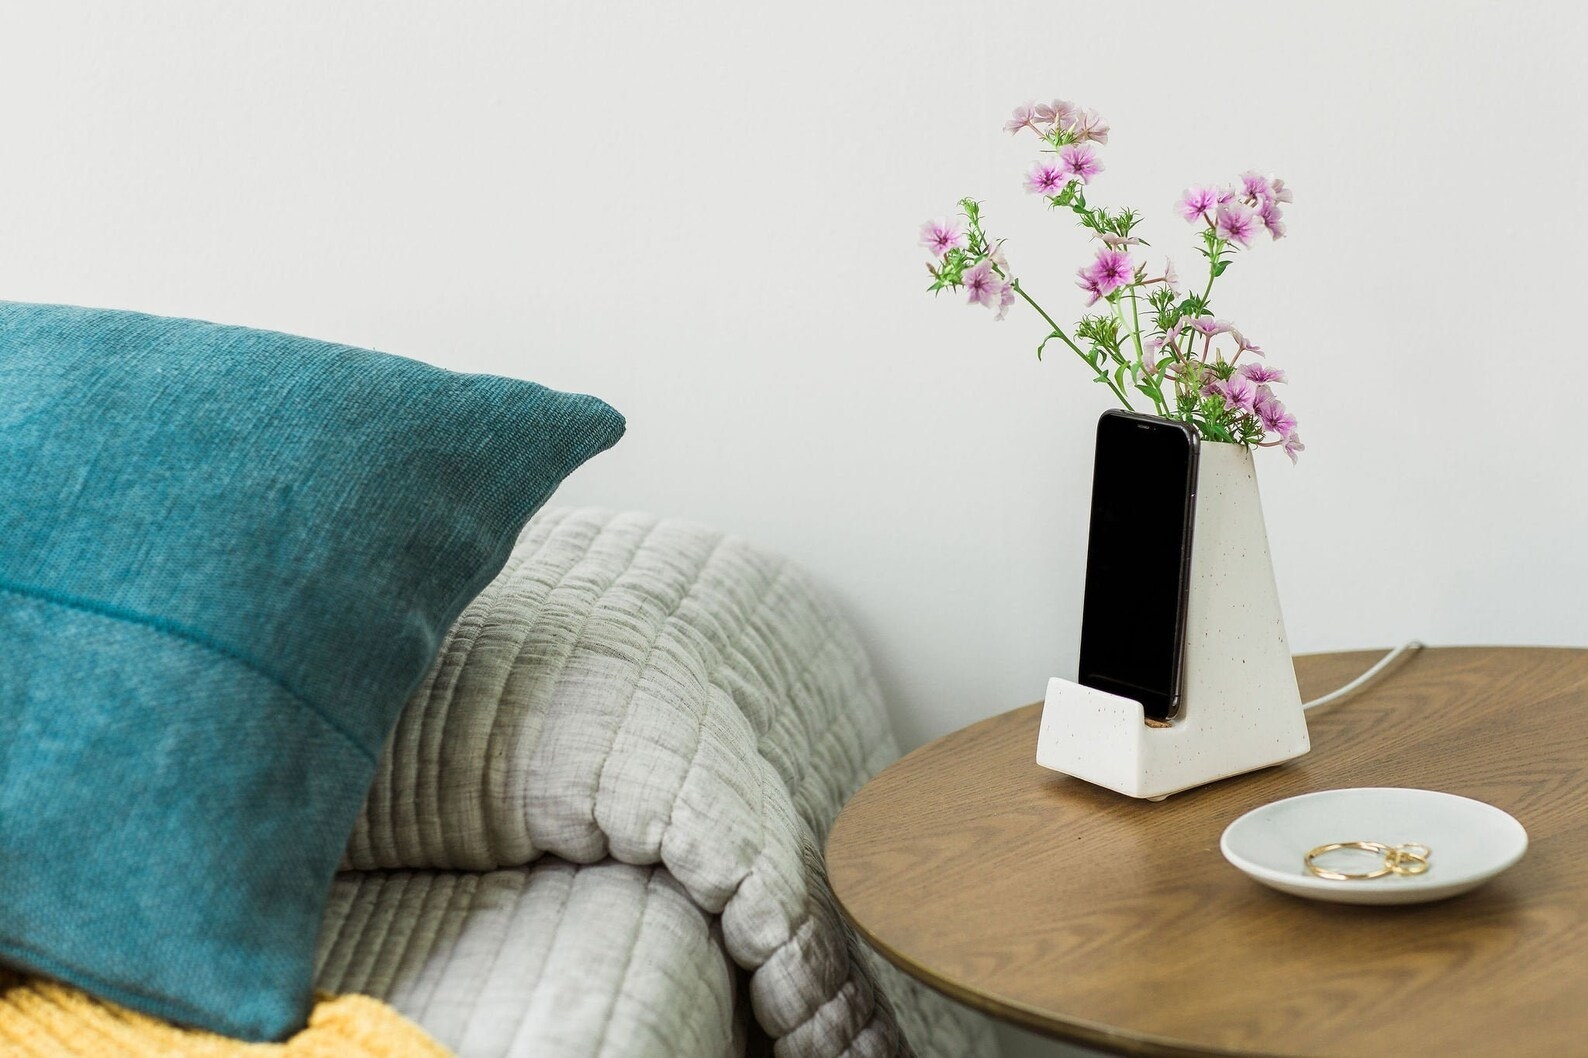 the white speckled phone dock and vase on a bedside table